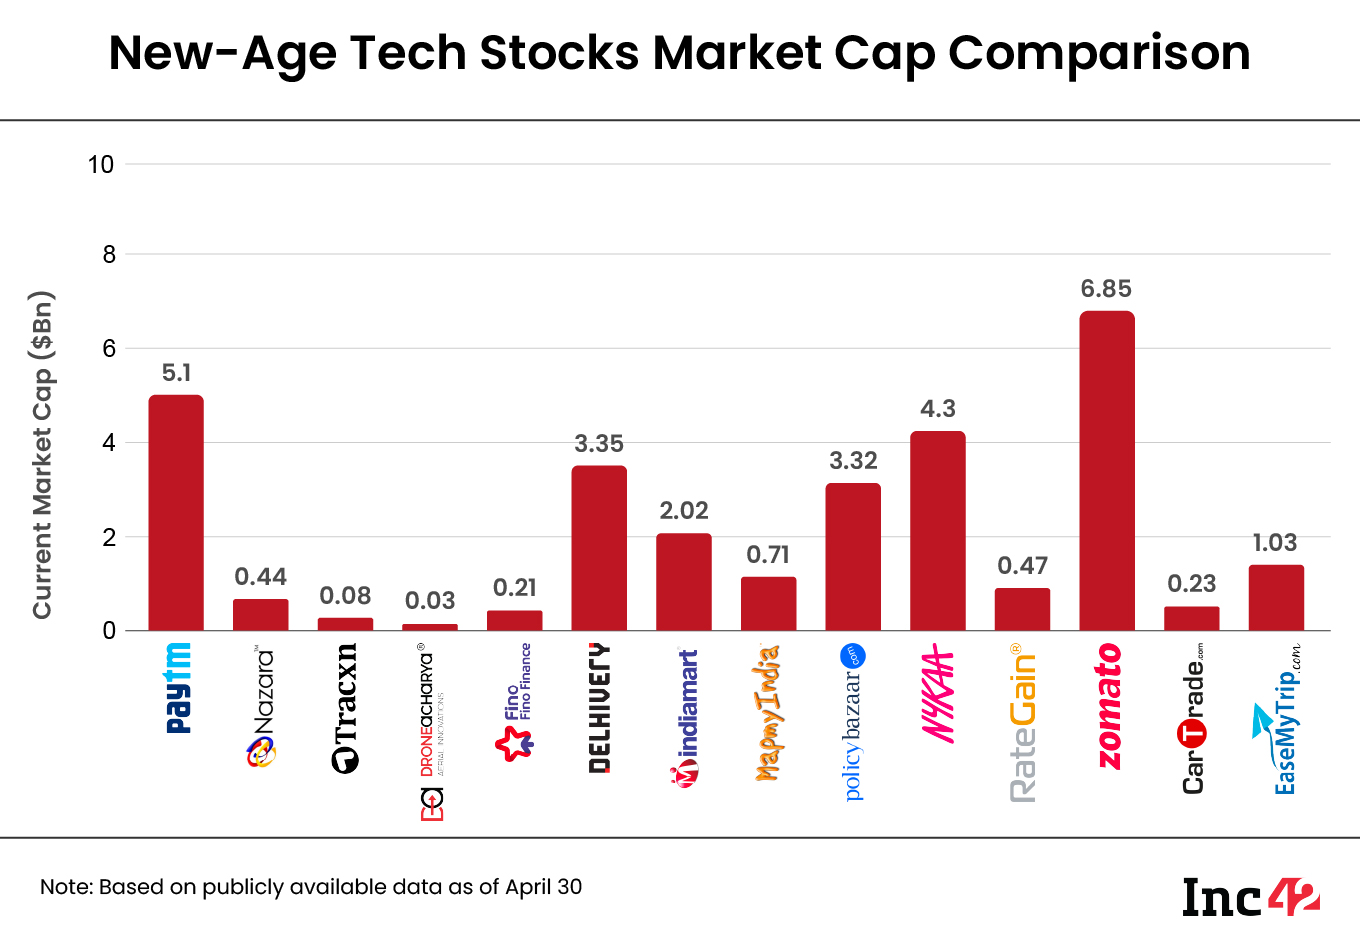 The 14 new-age tech stocks under Inc42’s coverage ended the week with a cumulative market cap of $28.14 Bn as against $26.99 Bn last week.  